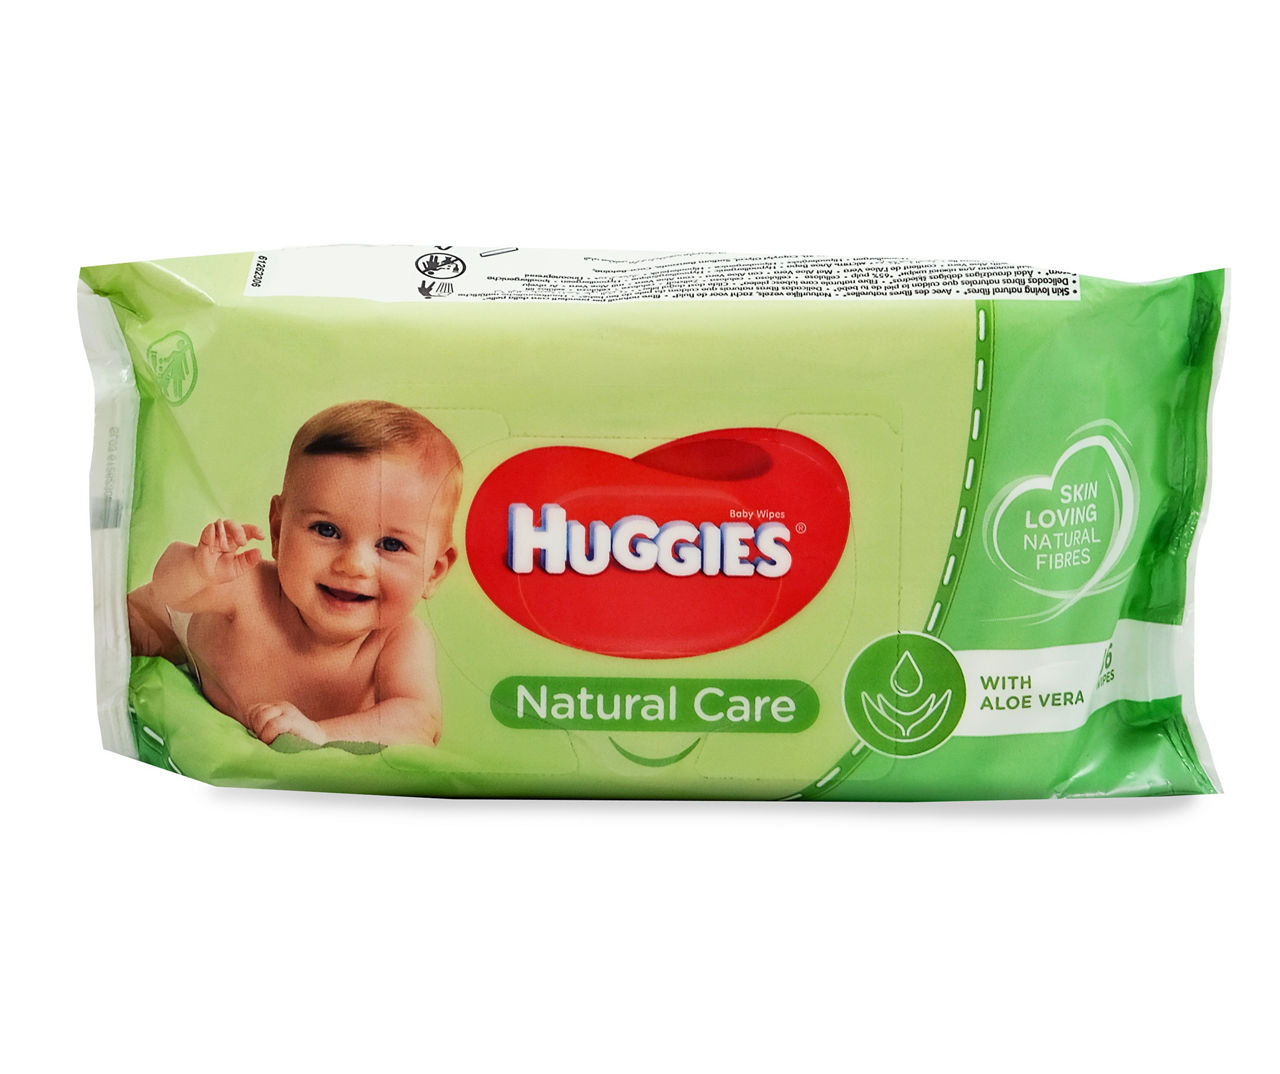 Huggies Natural Care With Aloe Vera Wipes 56 Pack